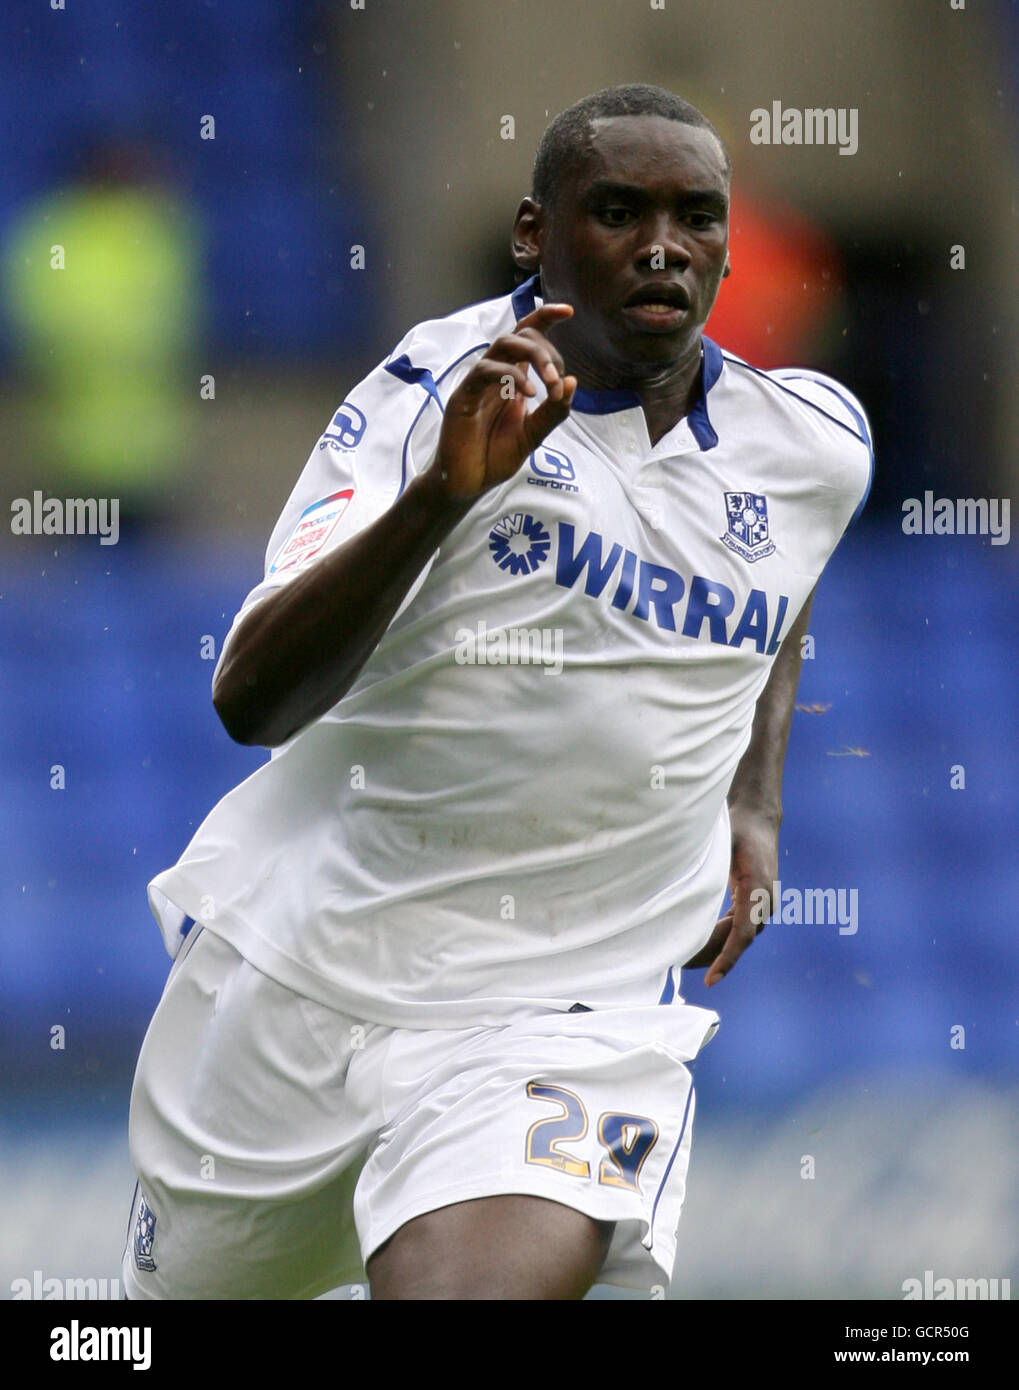 Football - npower football League One - Tranmere Rovers / Charlton Athletic - Prenton Park.Jermaine Grandison, Tranmere Rovers Banque D'Images